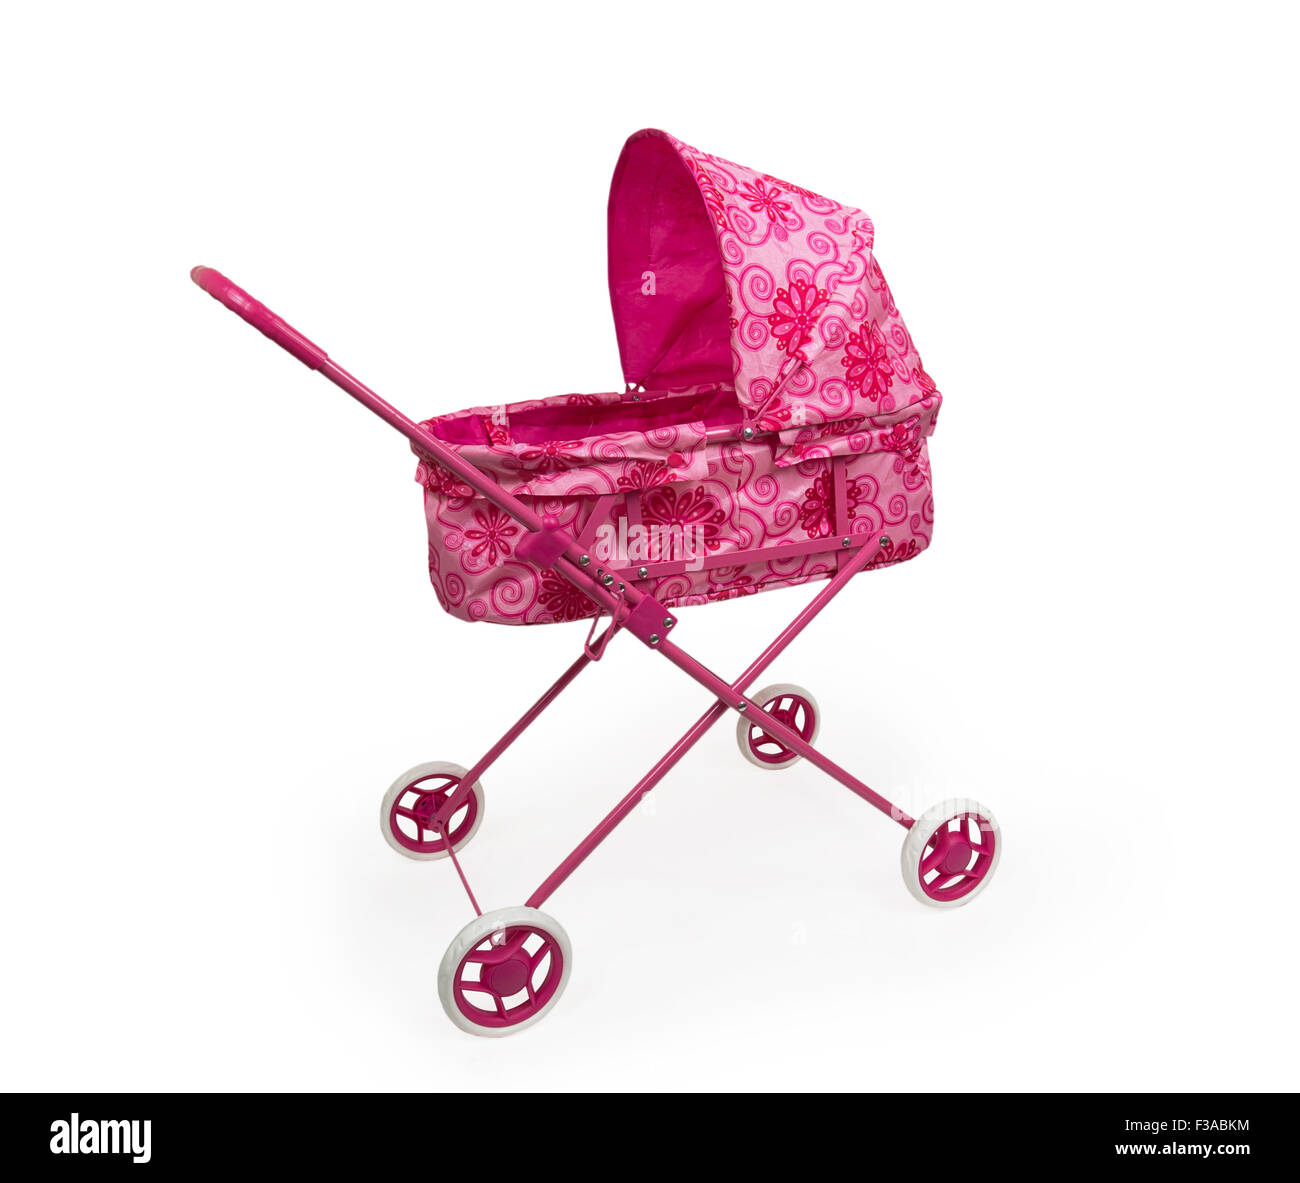 Toy pink pram isolated on a white background Stock Photo